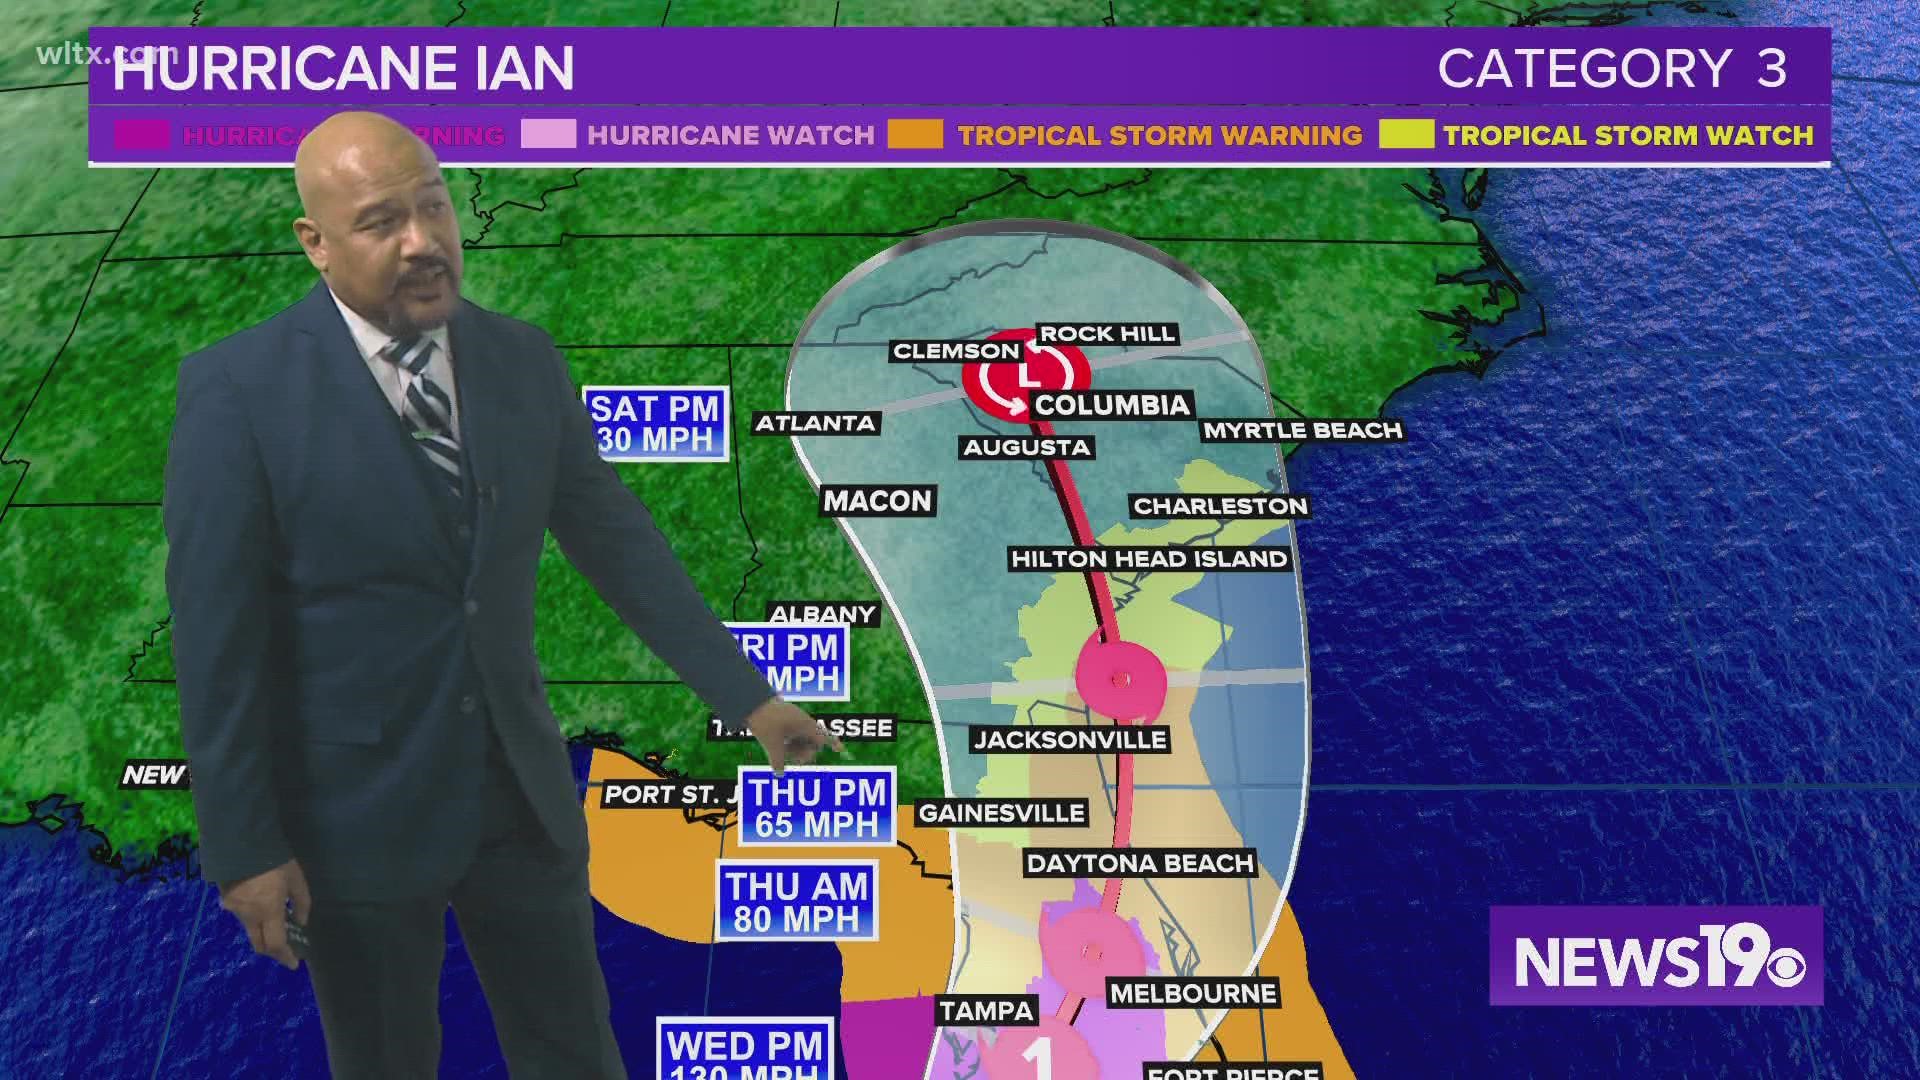 Heavy rainfall, flash flooding and gusty winds to begin in The Midlands by Thursday night.